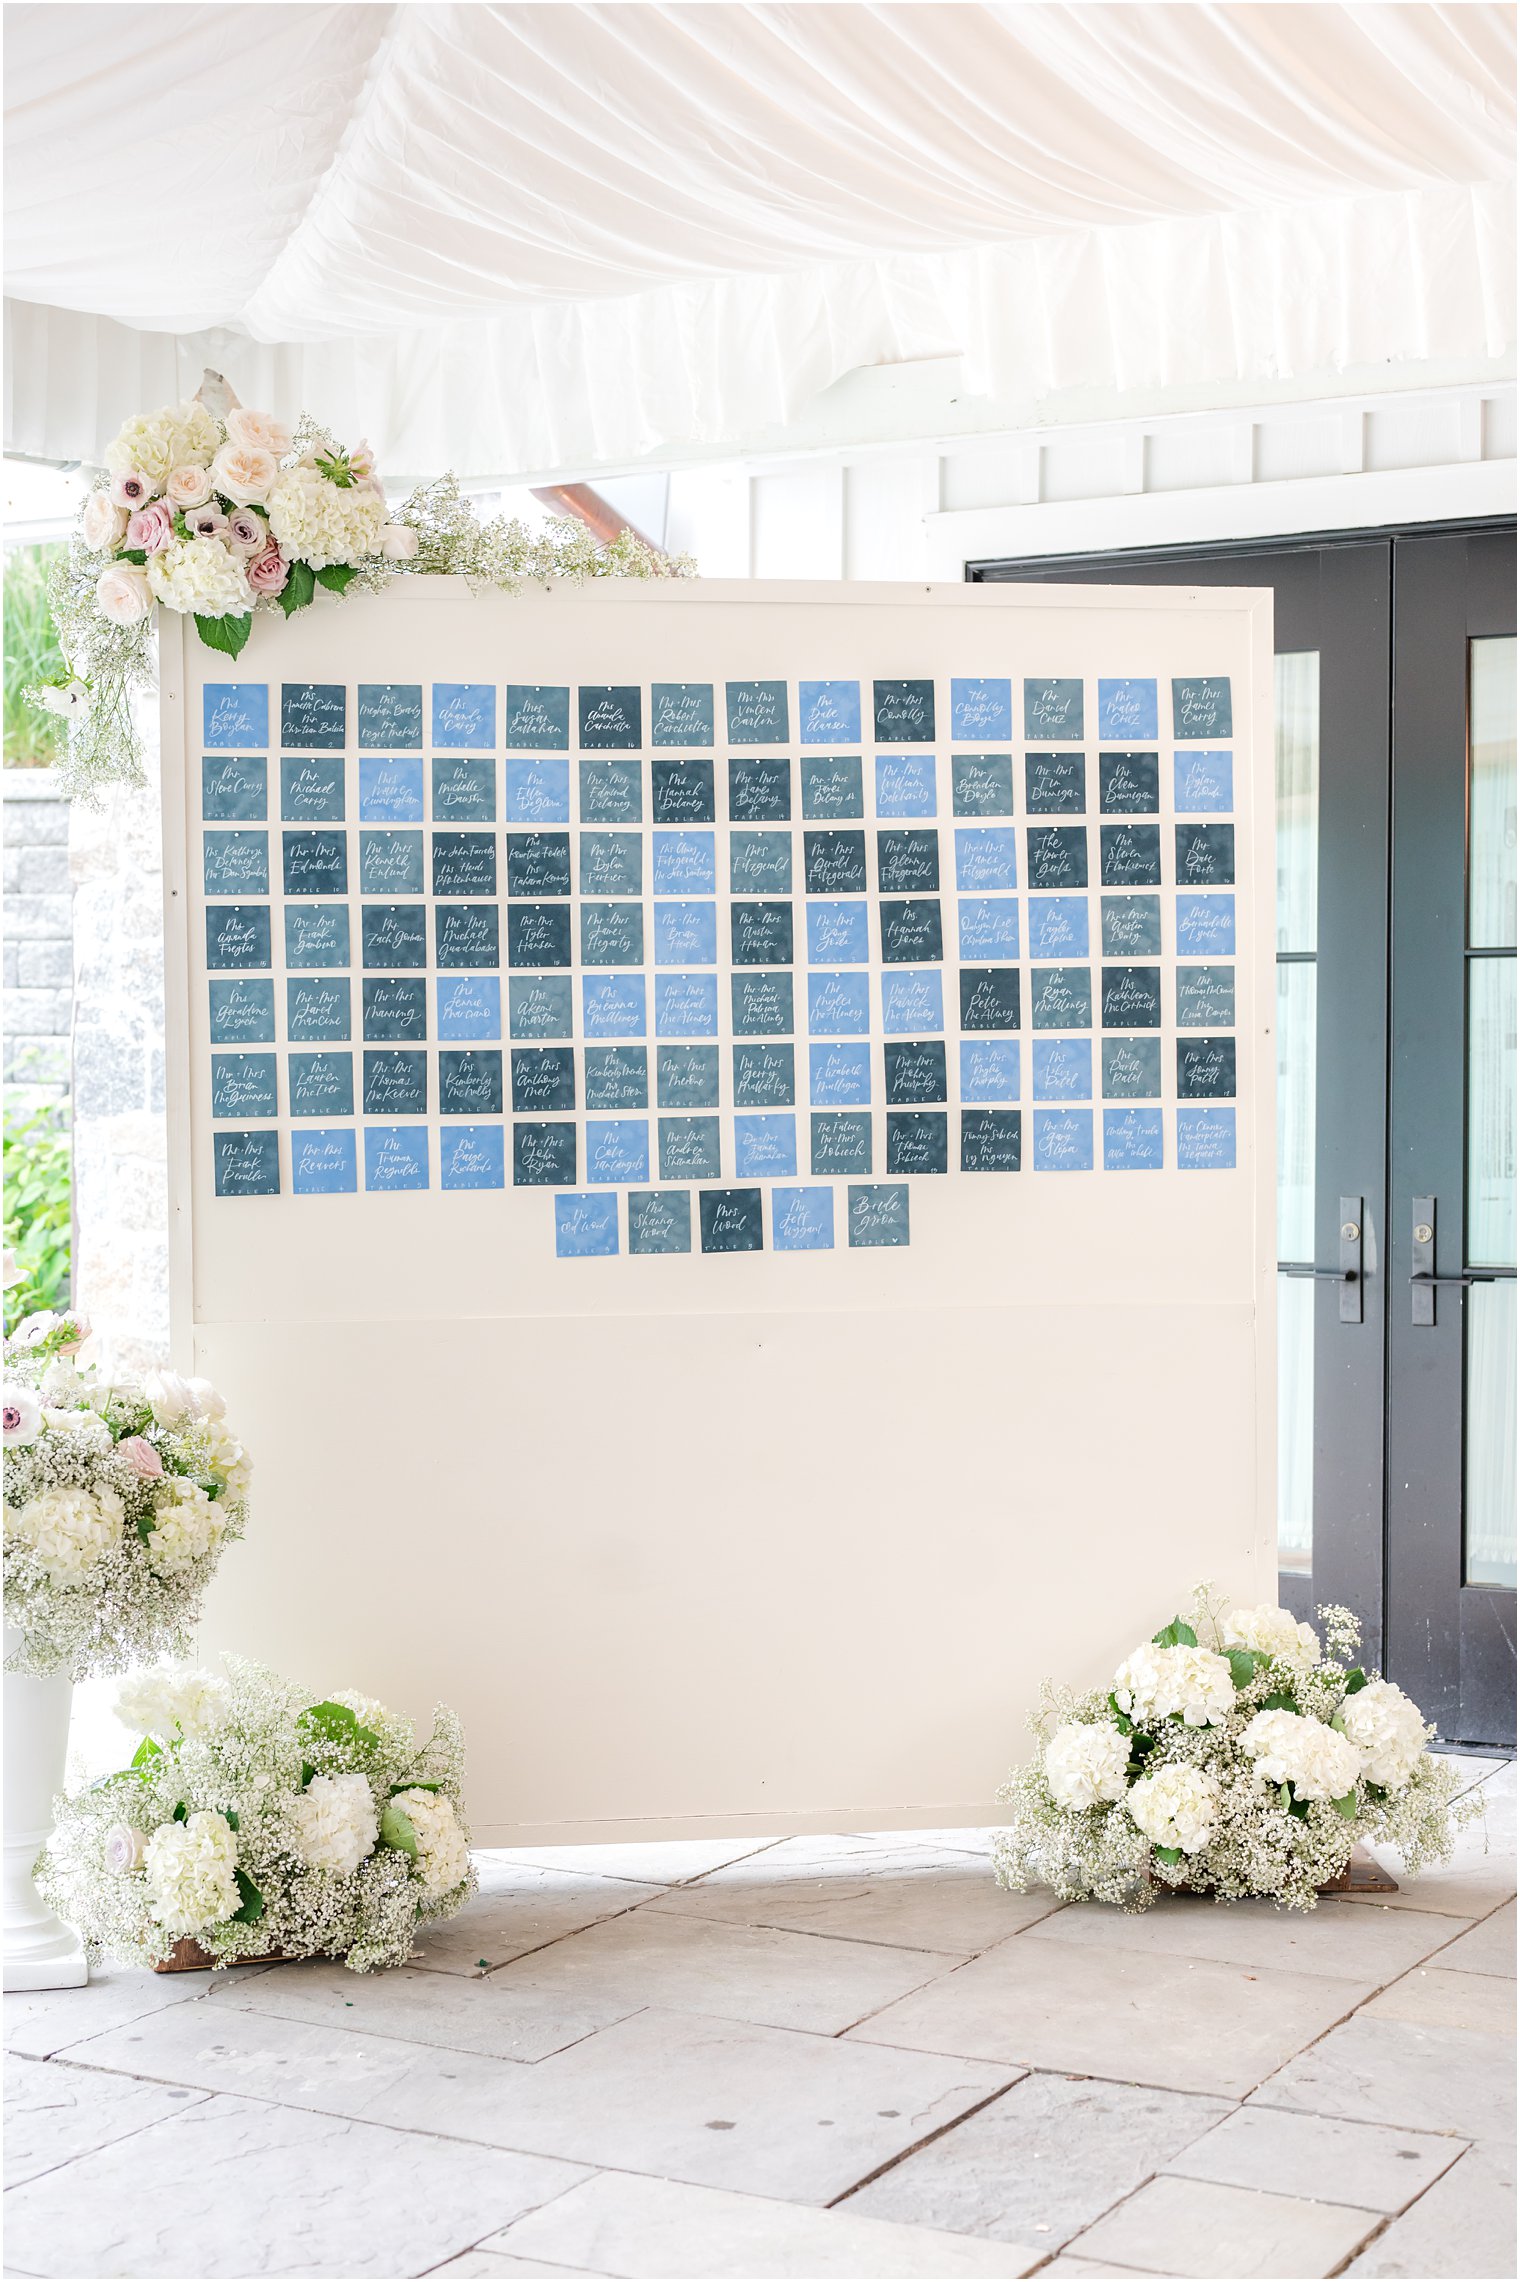 seating cards display with blue tiles